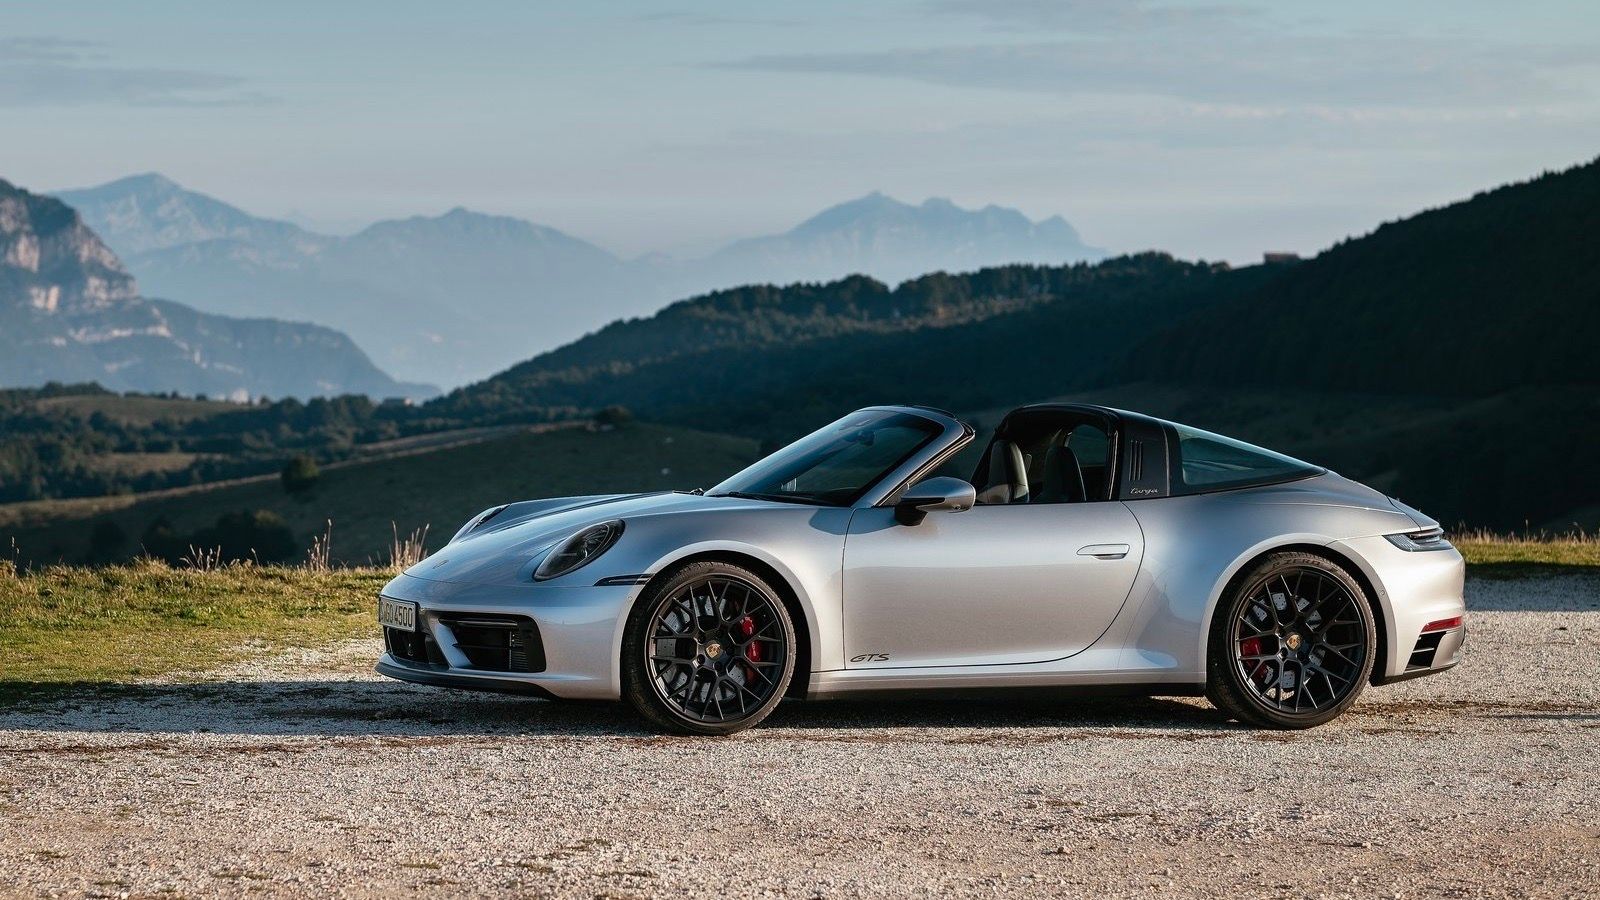 Porsche Releases a Limited-Edition Hybrid